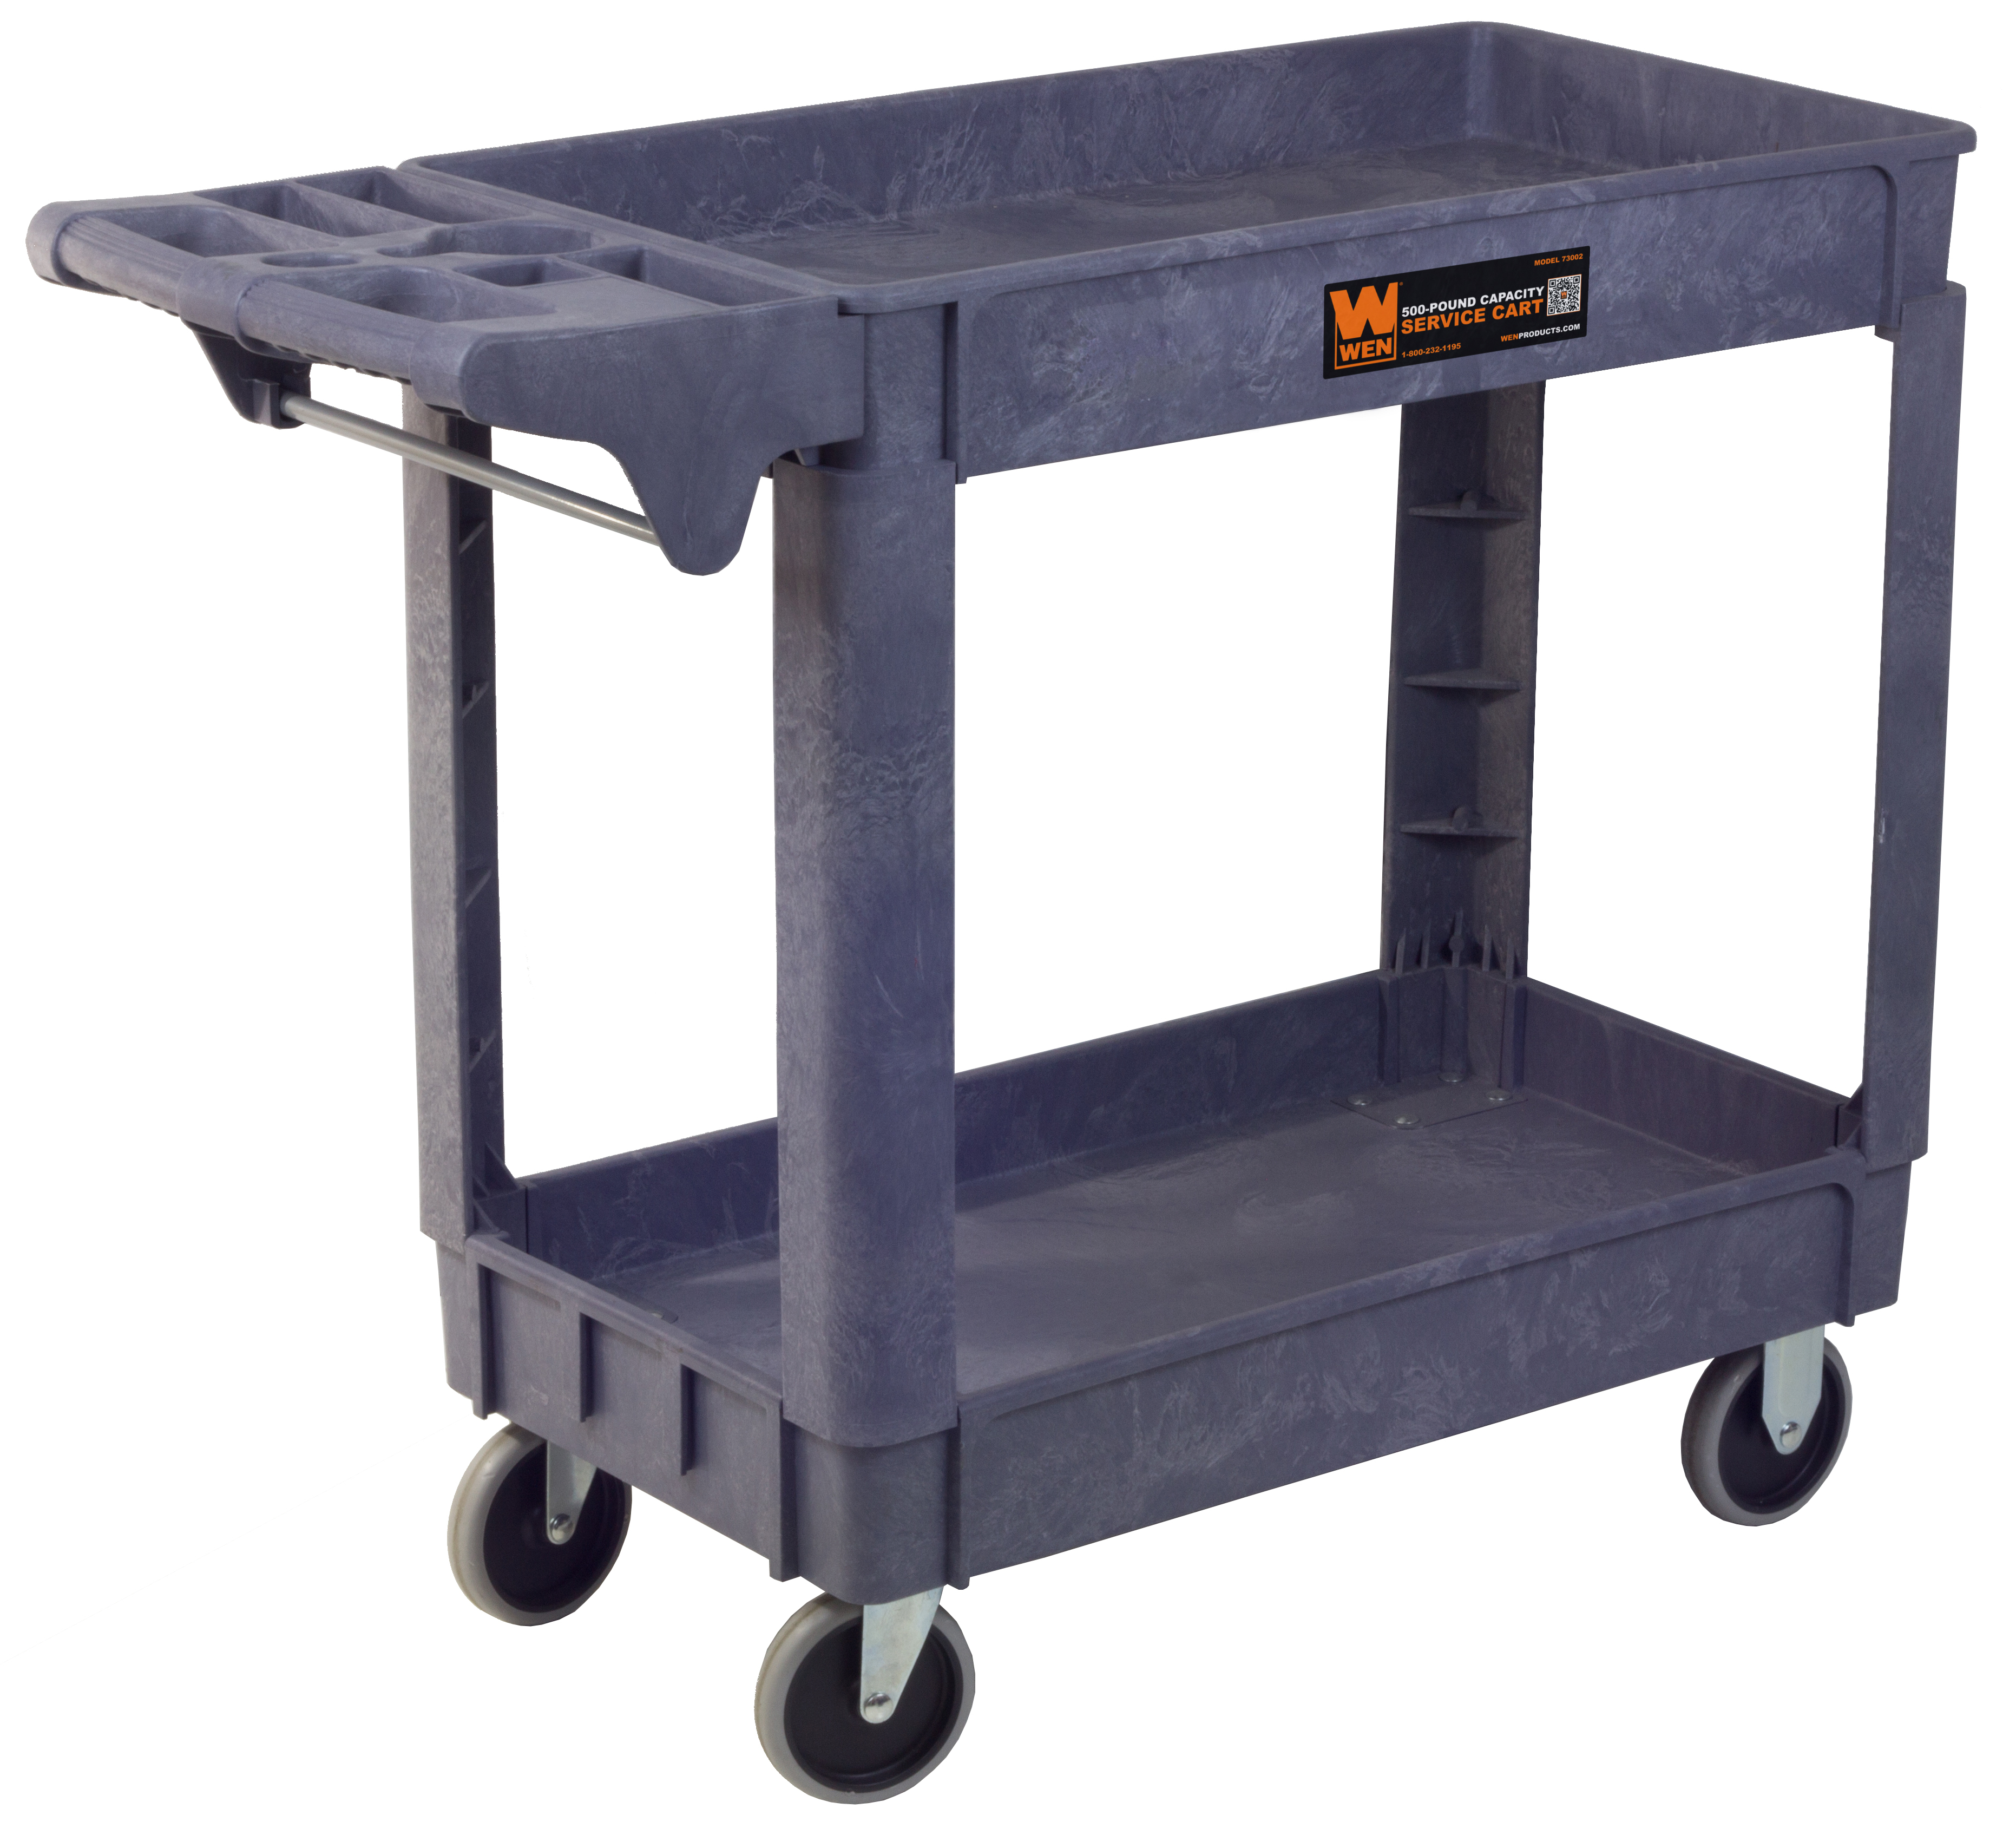 WEN 73002 500-Pound Capacity 40 by 17-Inch Rolling Tool Service Utility Cart - image 1 of 4